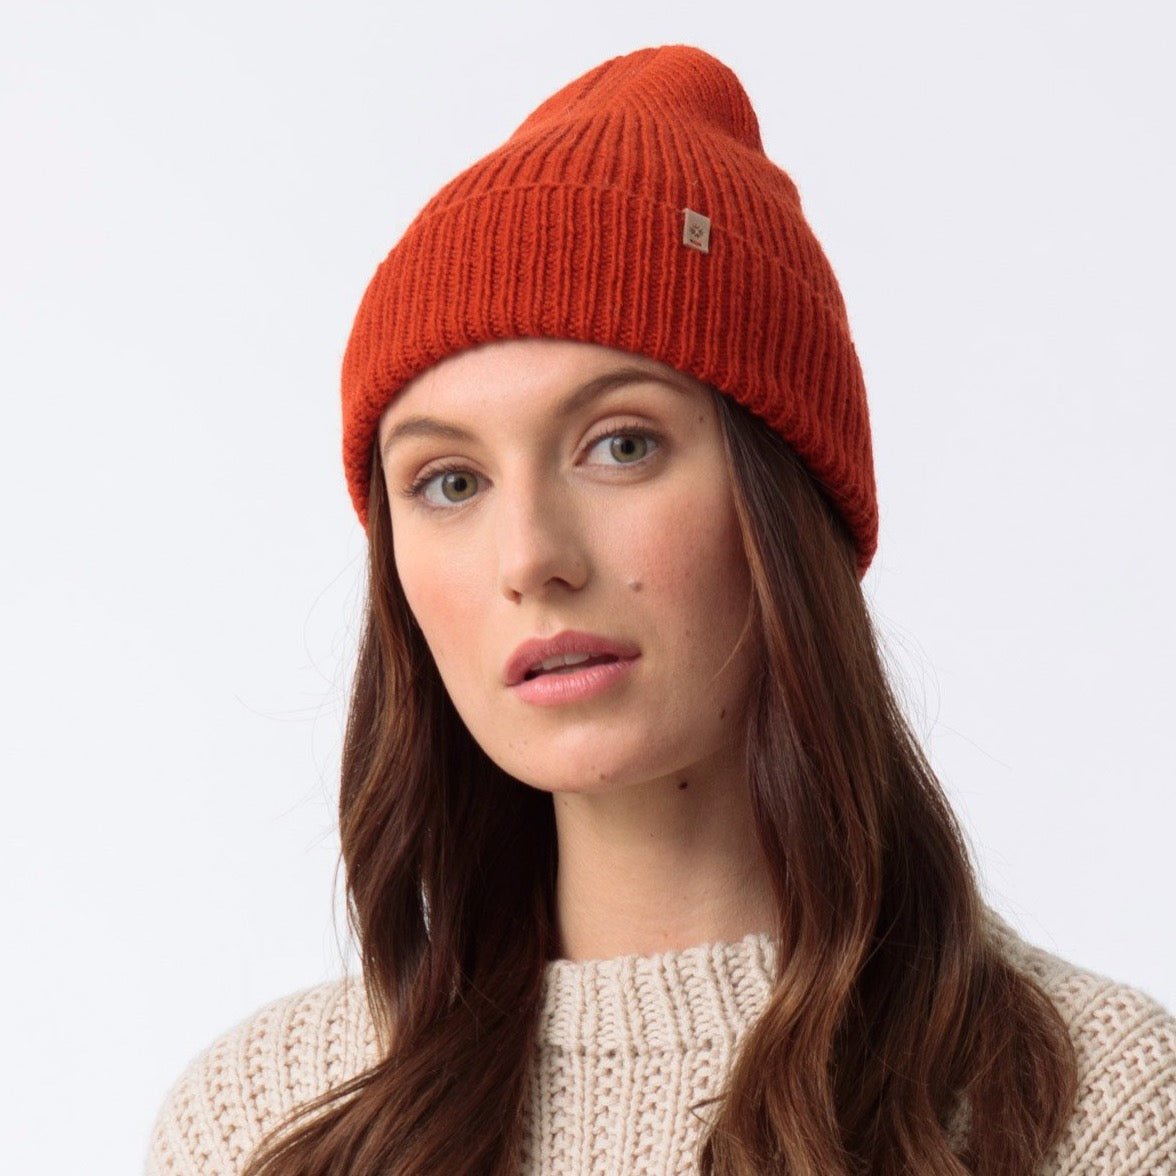 Bright orange knitted and cuffed hat with a decrease detail on top. The Merino Rib hat in Burnt Orange is designed by Dinadi and hand knitted in Kathmandu, Nepal.